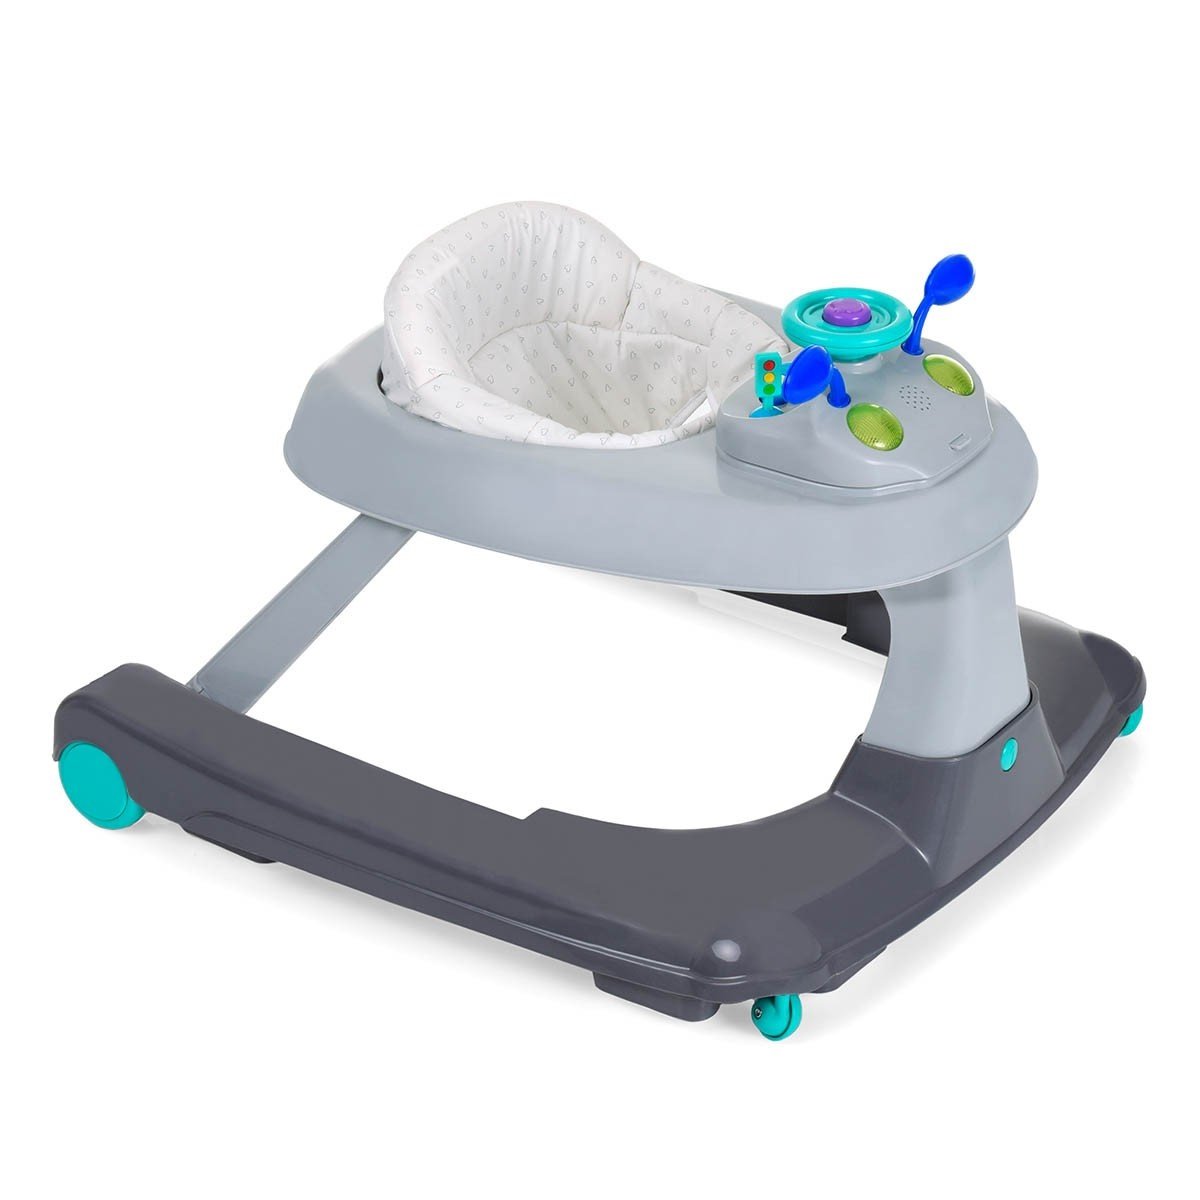 Hauck Walker Ride On 1-2-3 - Walker from 6 Months / Walker with Play Centre and Wheels / Height Adjustable Grey / Blue (Hearts)